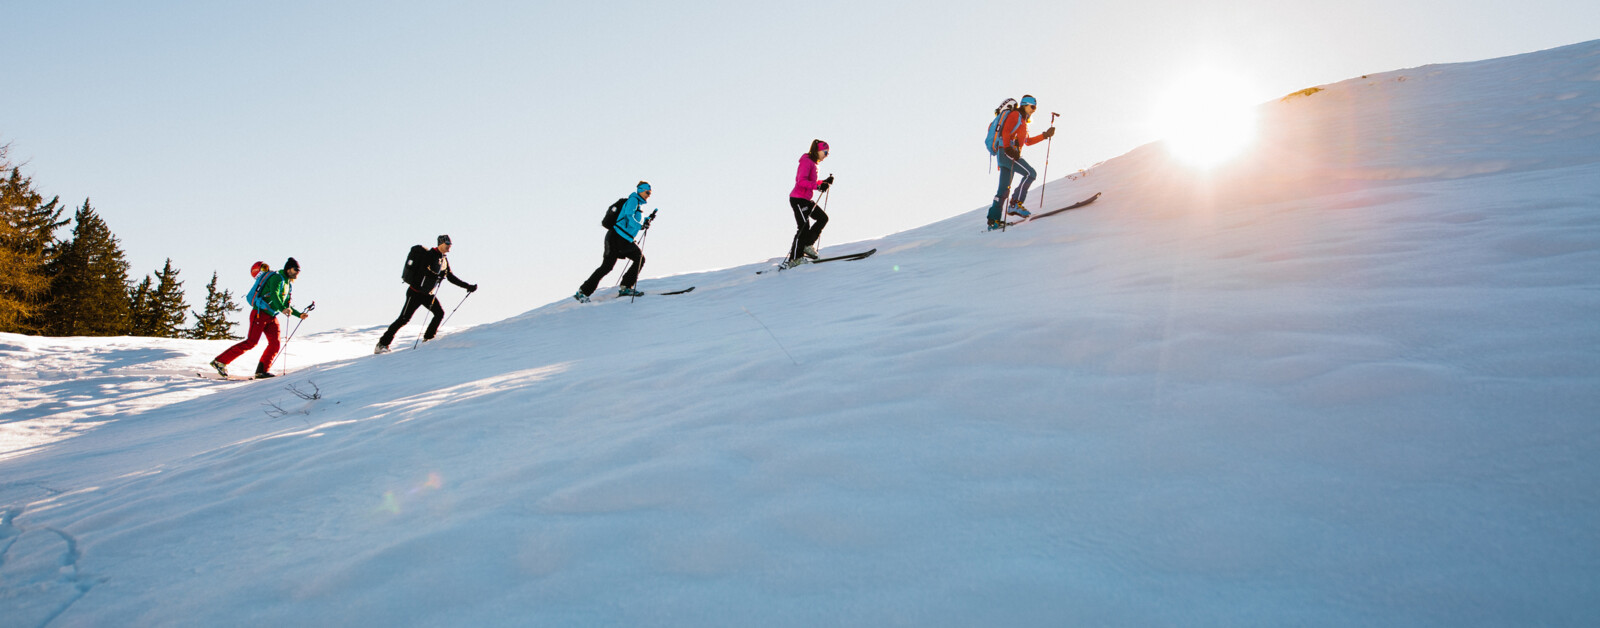 The Truth about Ski Touring